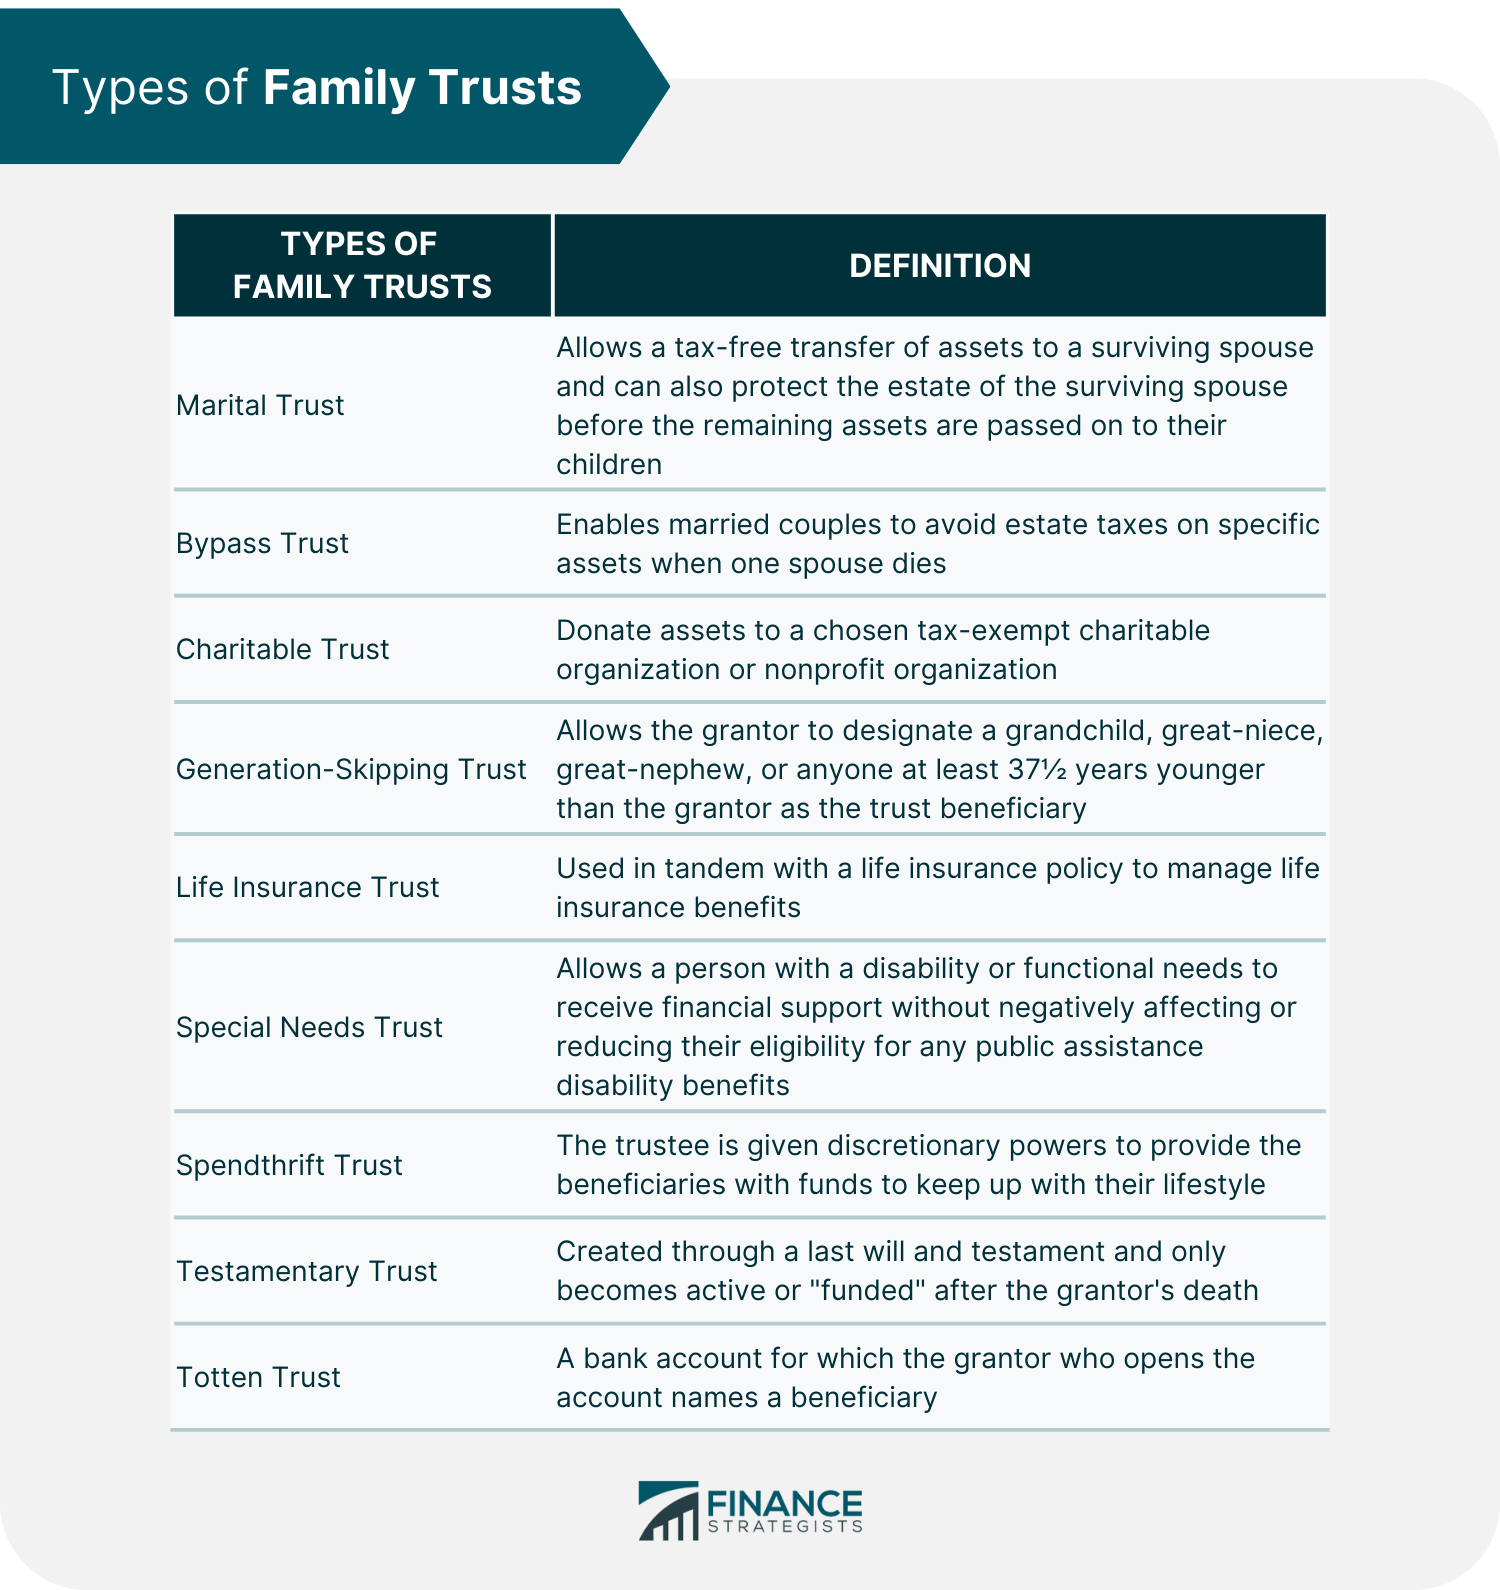 Types_of_Family_Trusts